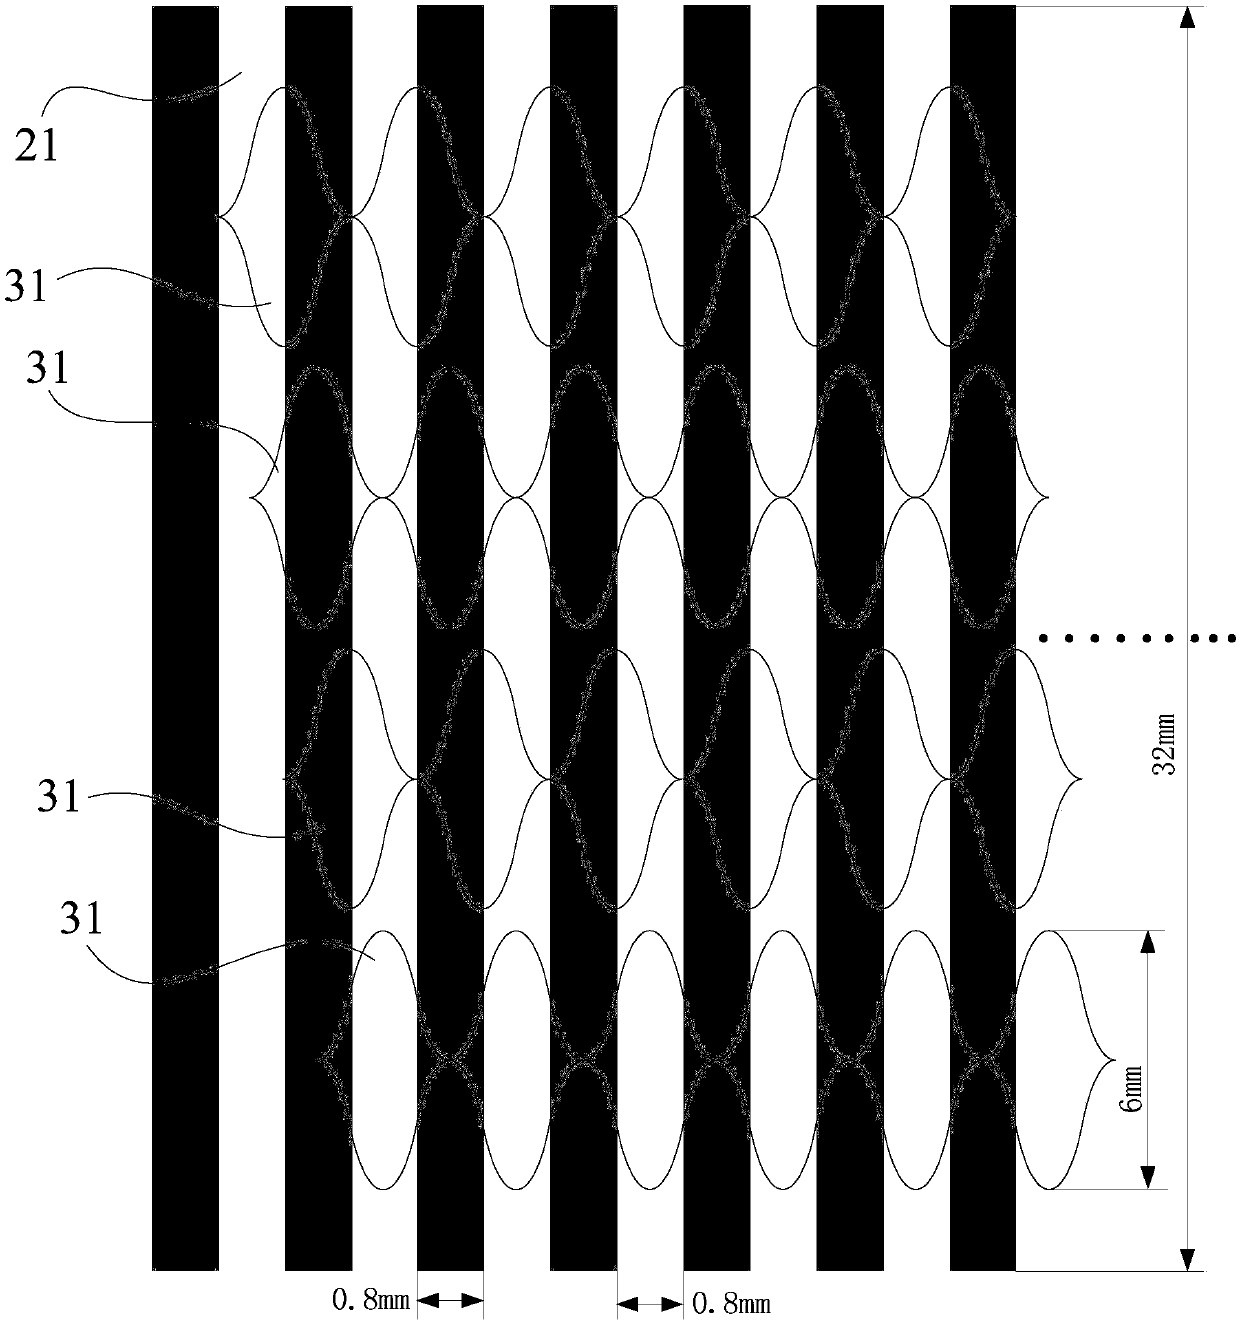 Linear displacement measurement system based on alternating light field